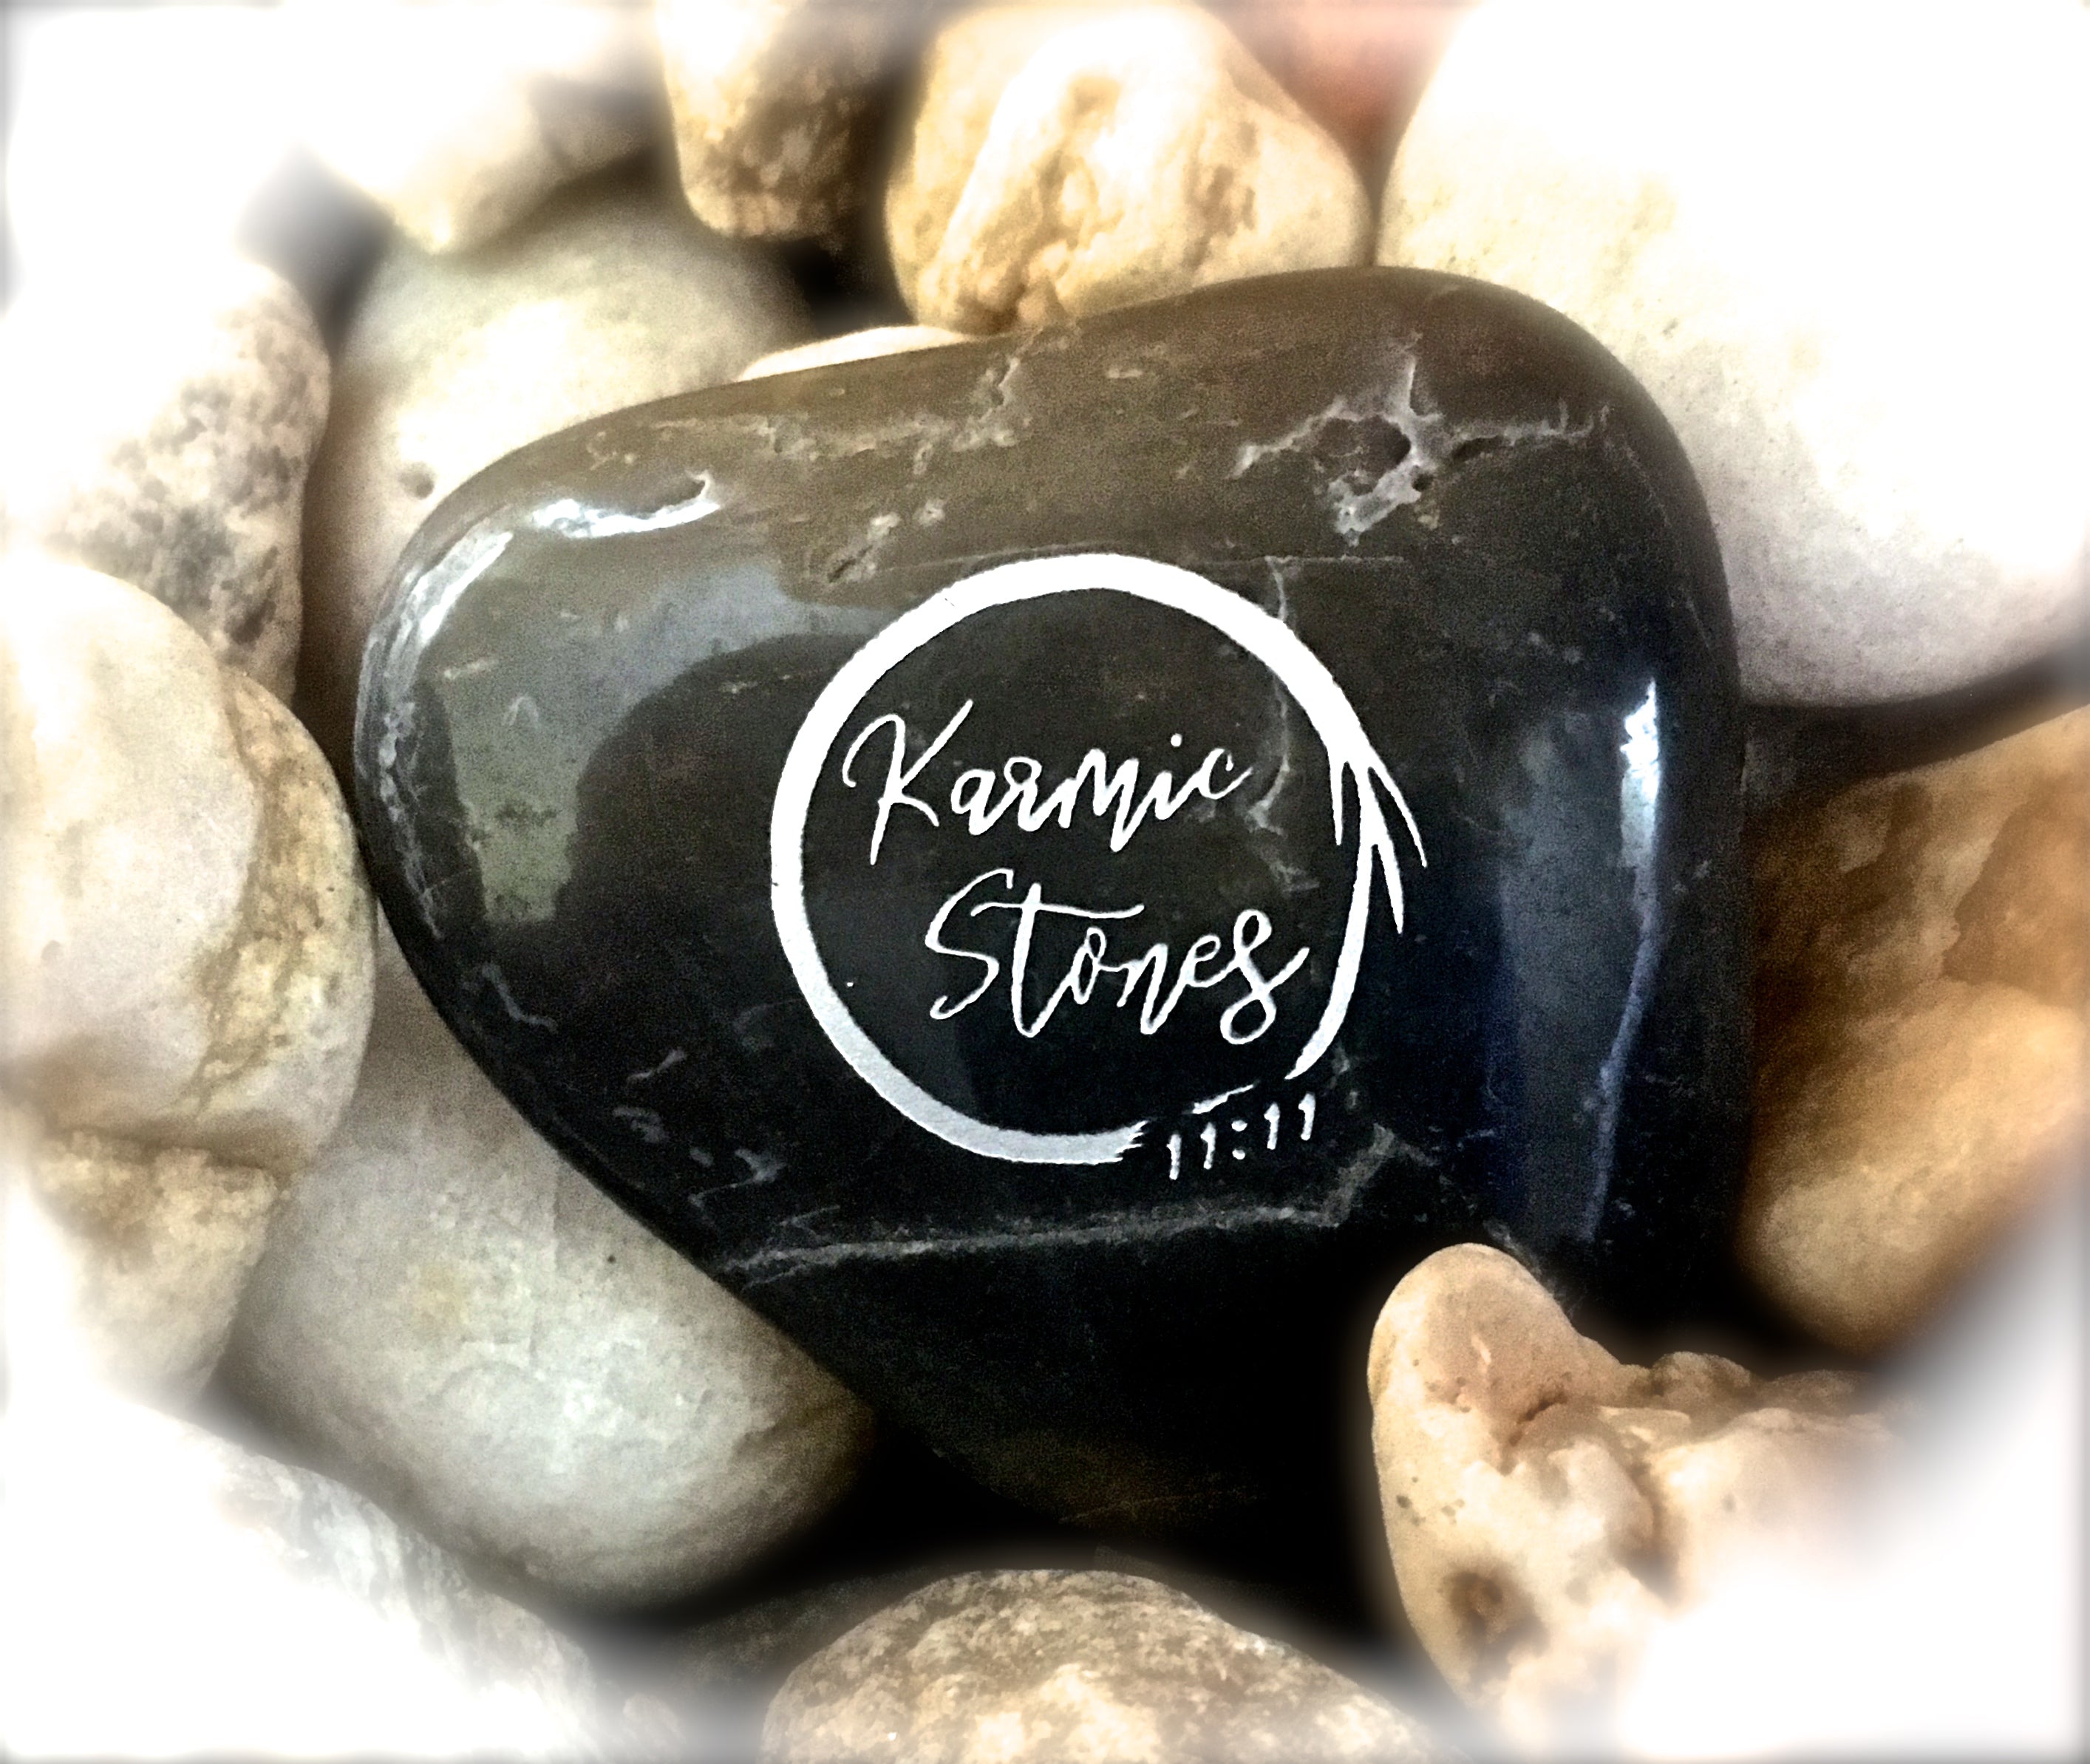 You Are Amazing. Remember That. ~ Engraved Inspirational Rock